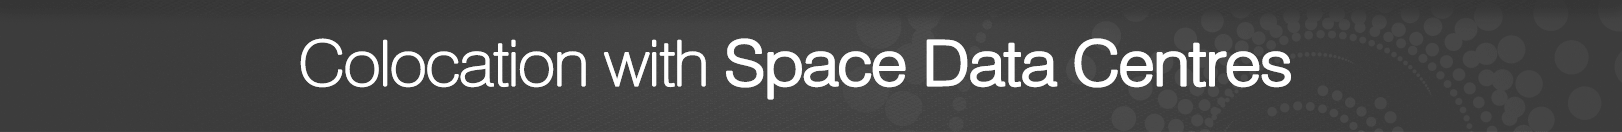 Colocation with Space Data Centres